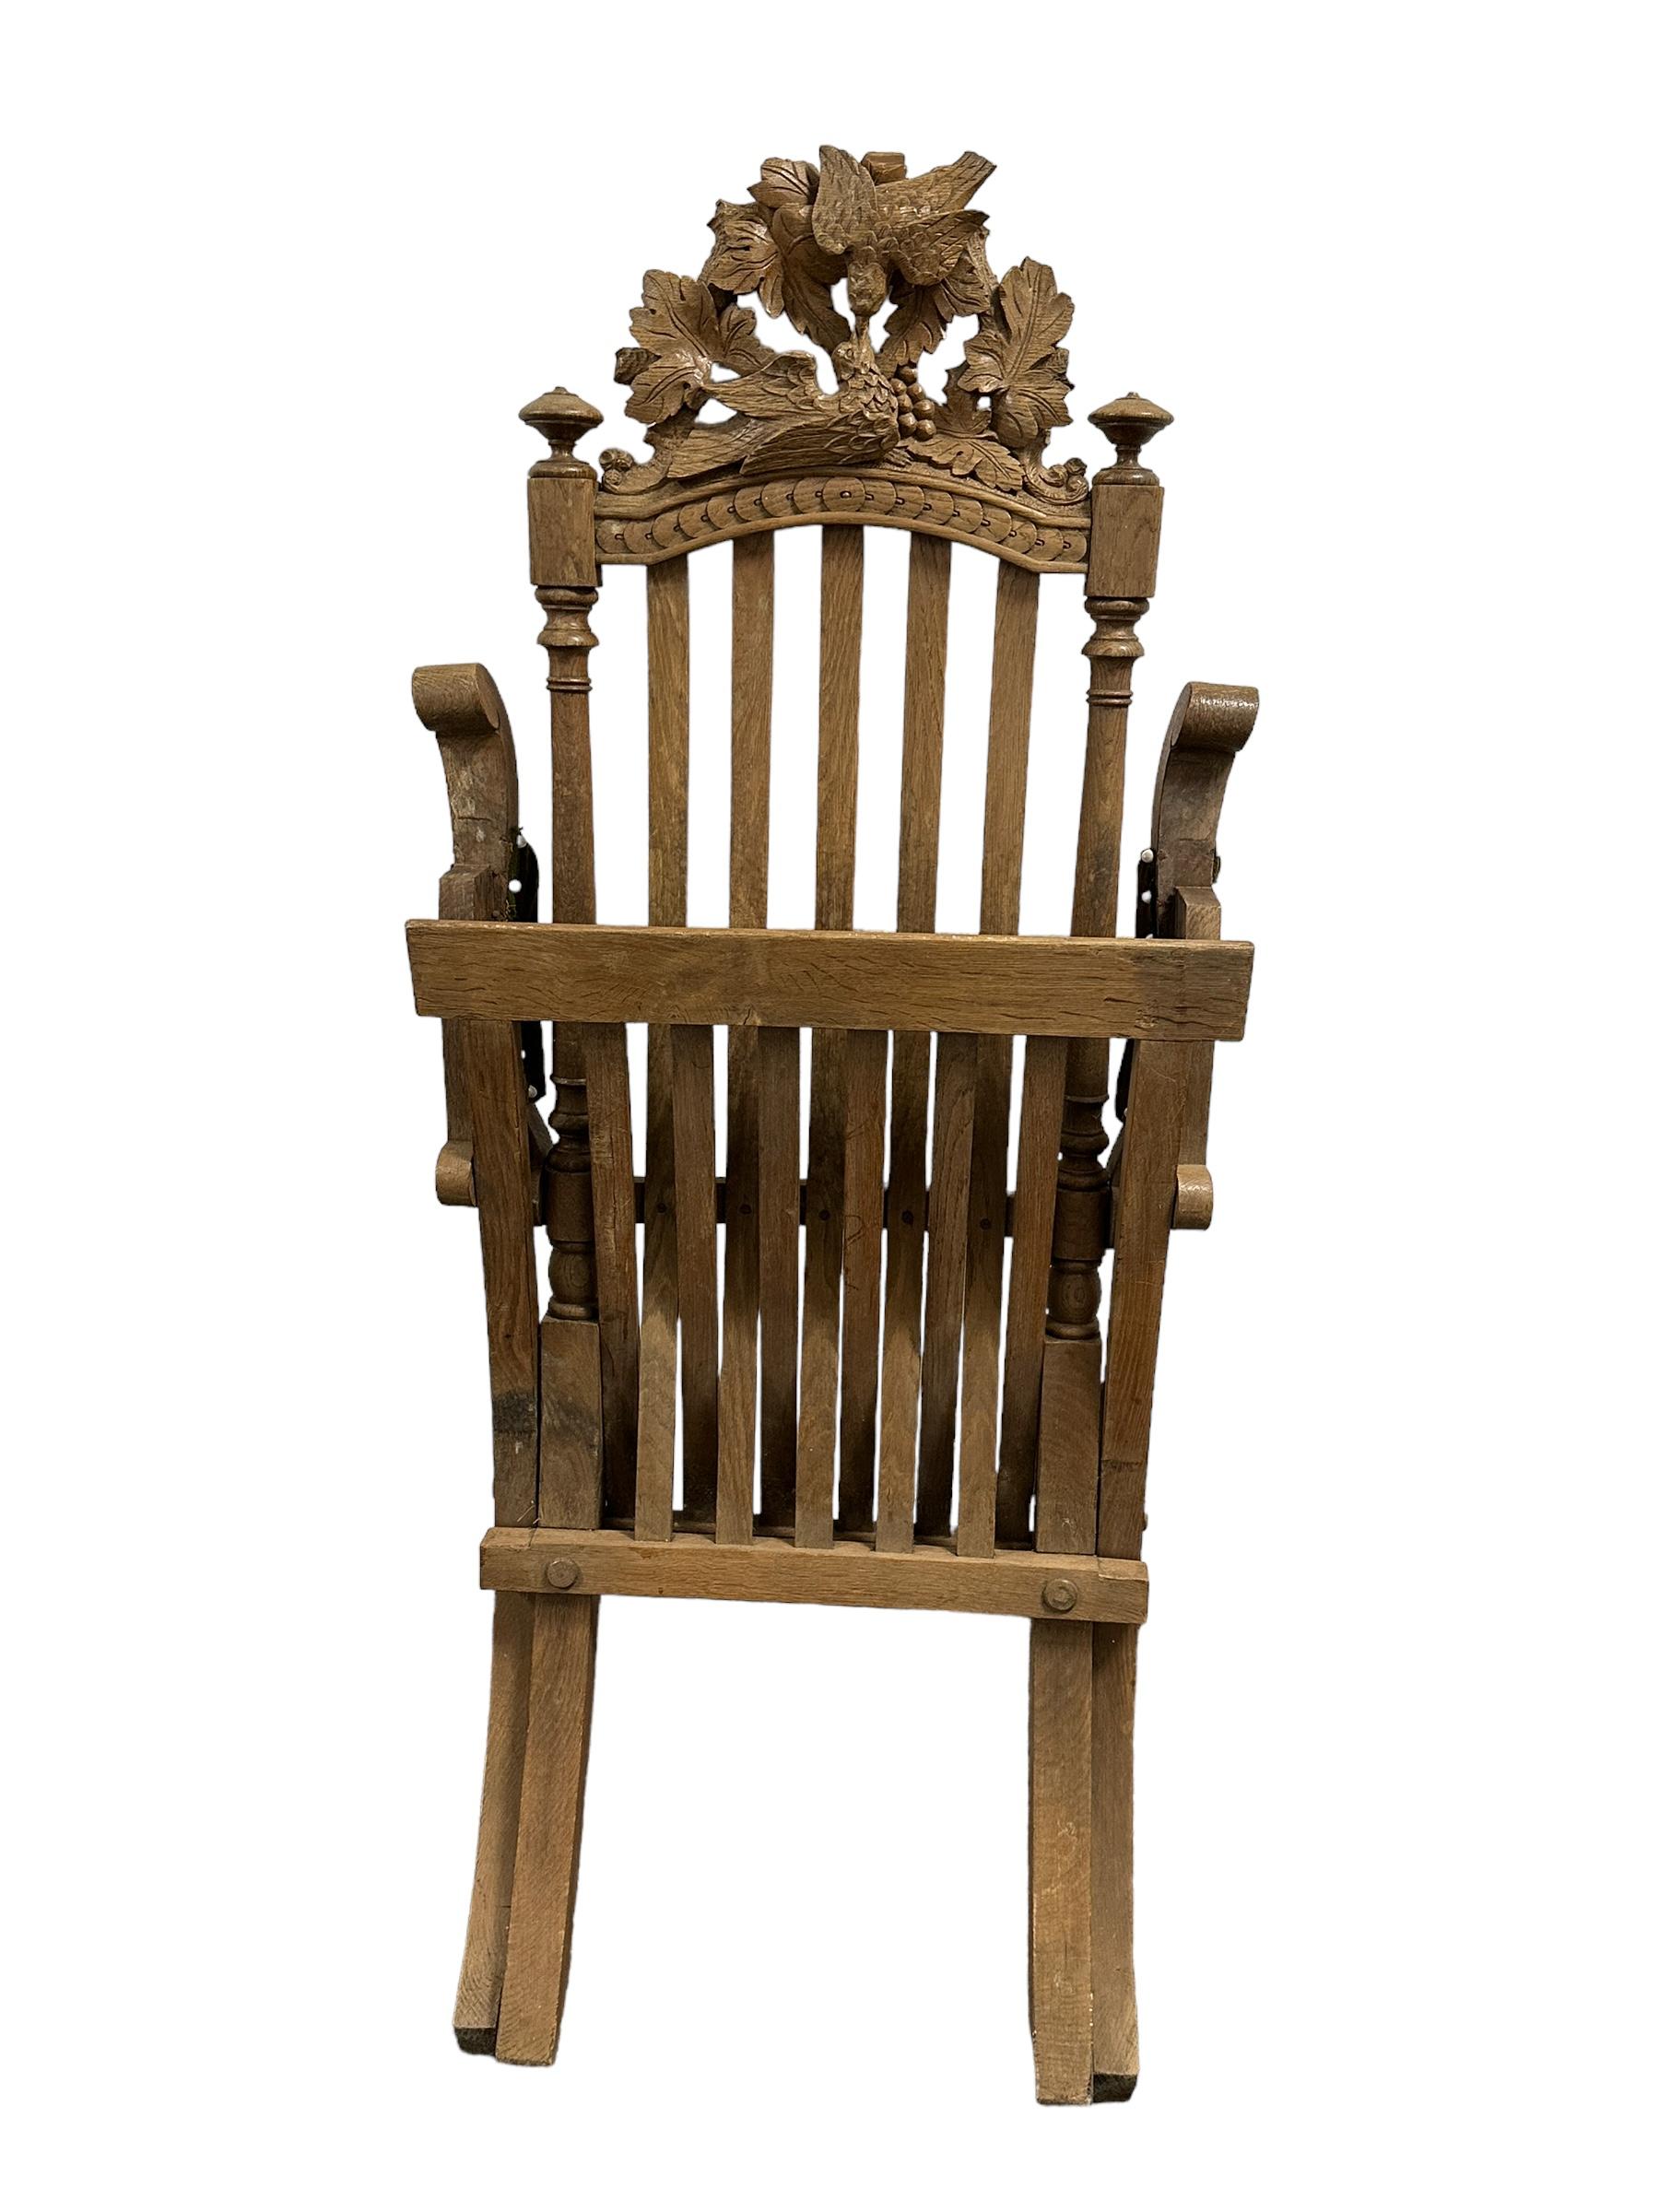 Antique Wooden Folding Chair, Black Forest Style carved Wood, 1910s For Sale 4